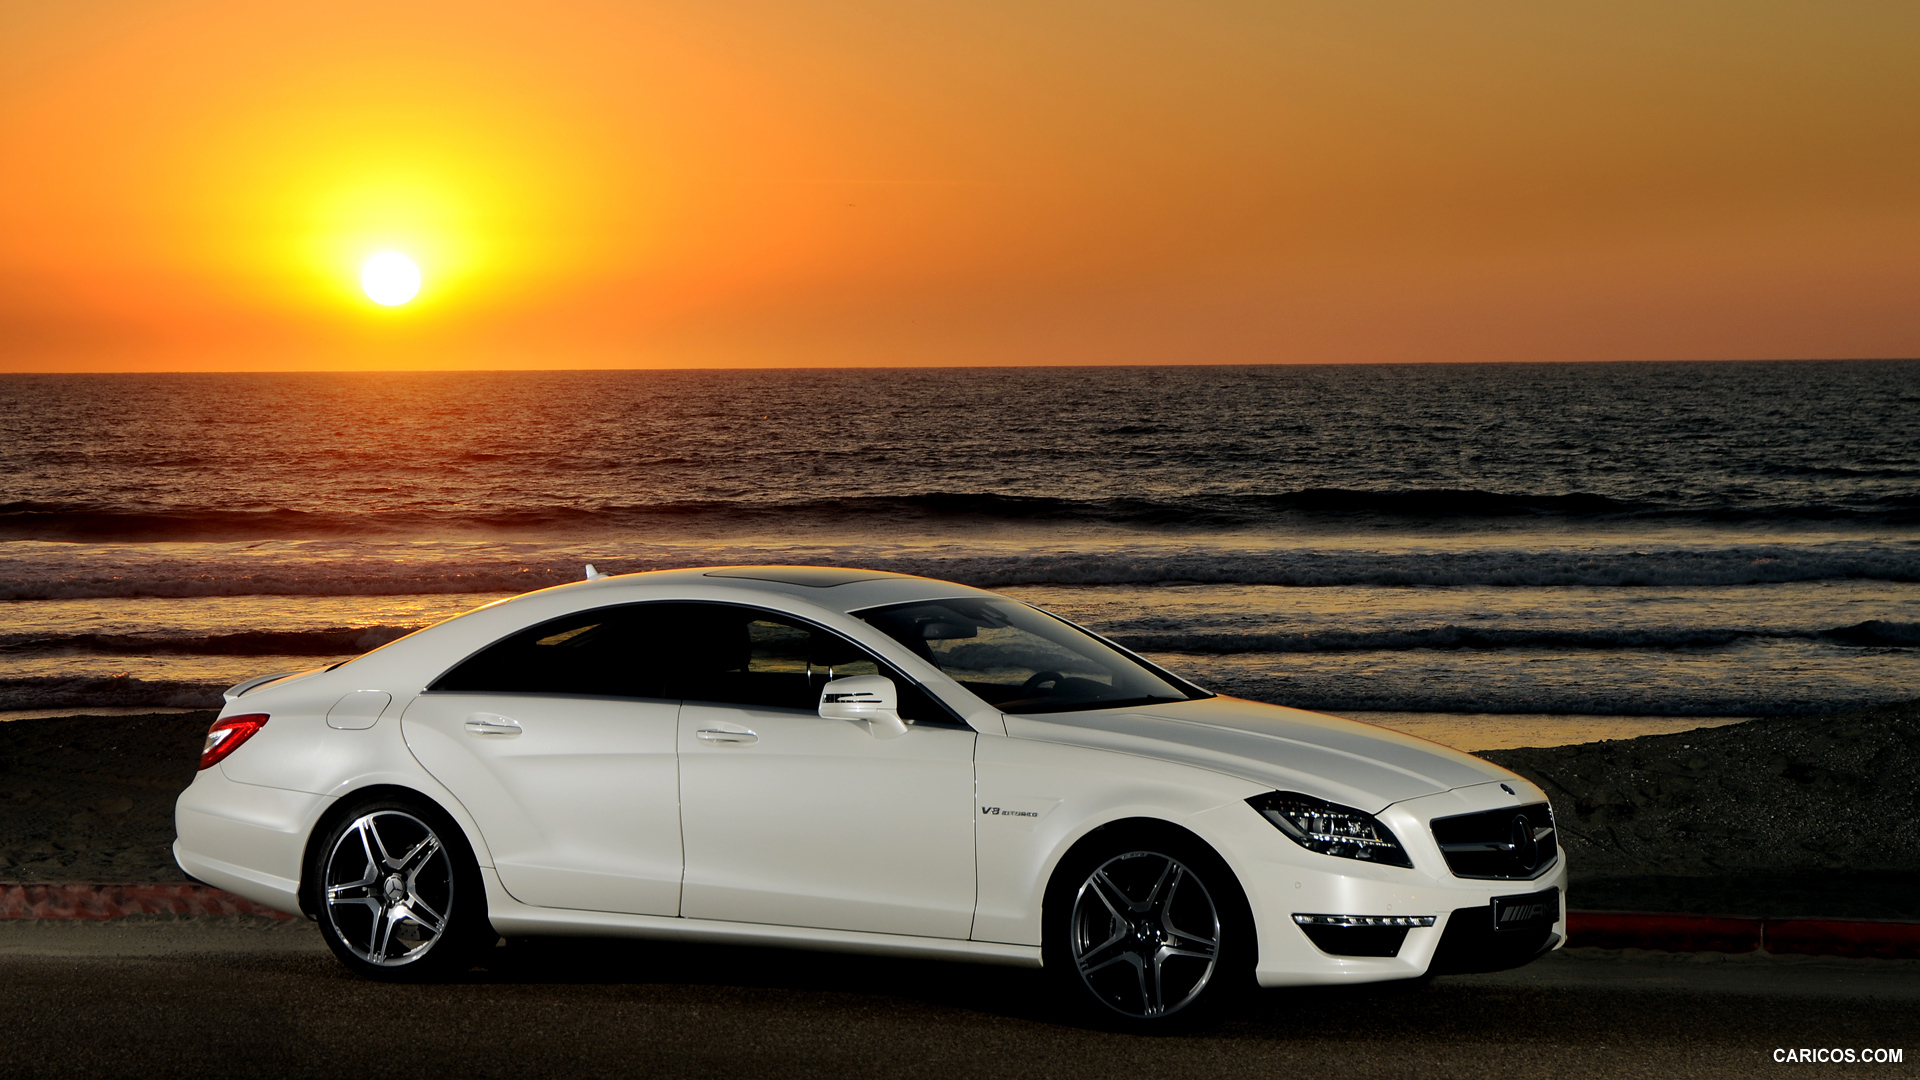 Mercedes-Benz CLS63 AMG (2012) US-Version - Diamond White - Side, #3 of 100